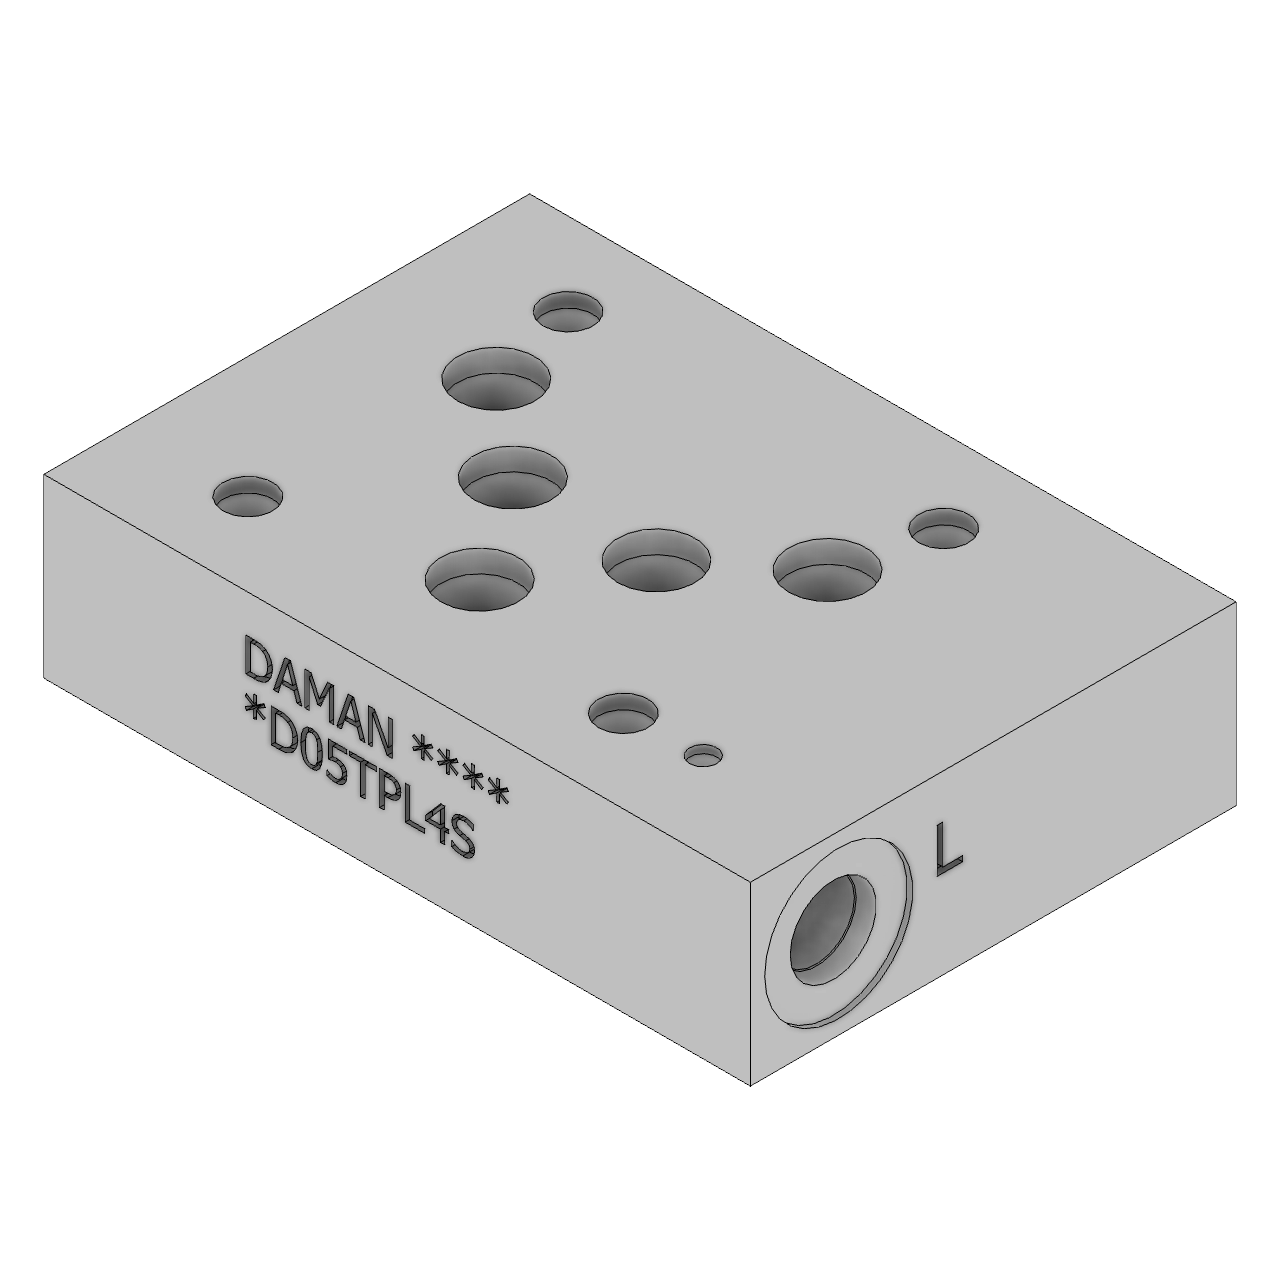 DD05TPL4S - Tapping Plates